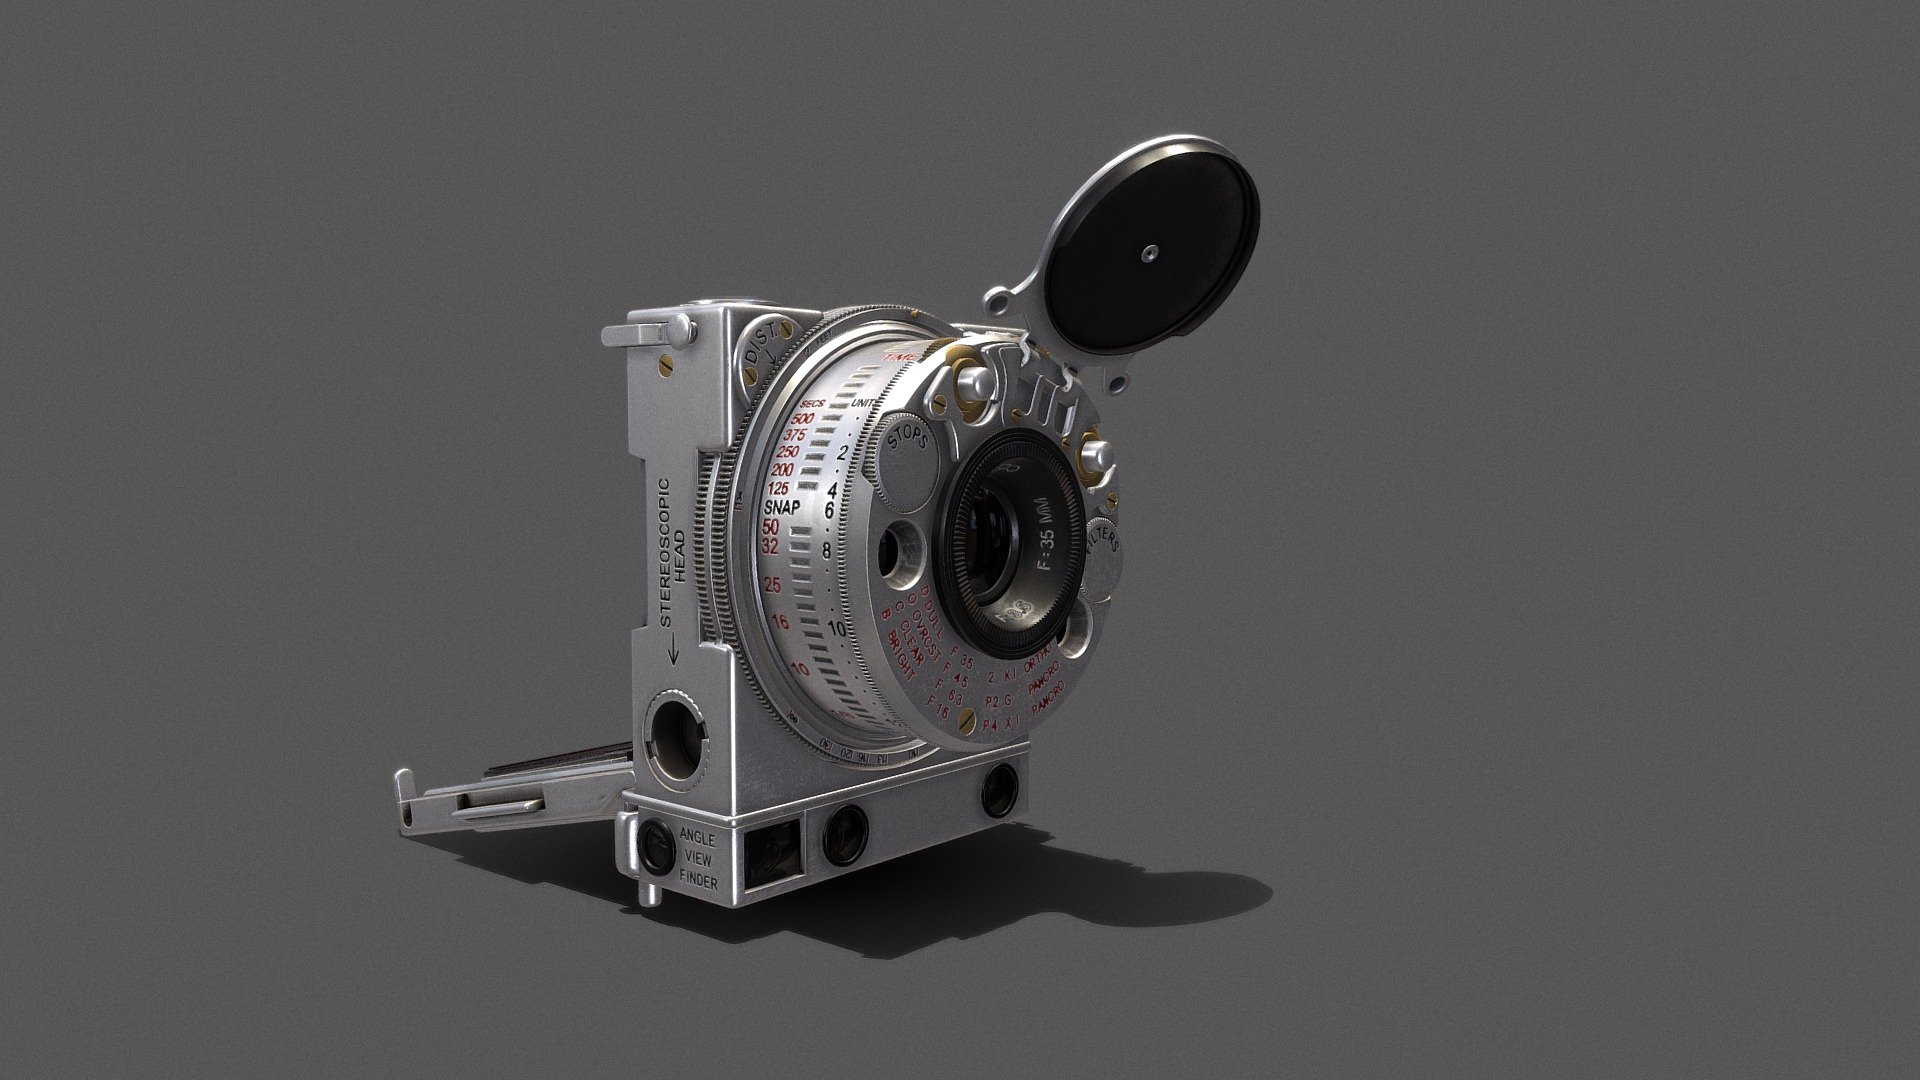 Lecoultre Compass 35mm compact camera in 1937 ( love at first sight item )

Some renders in artstation.com/artwork/ELX8Le

A youtube presentation video - LeCoultre Camera - 3D model by Halil Kantarci (@halilkantarci) 3d model